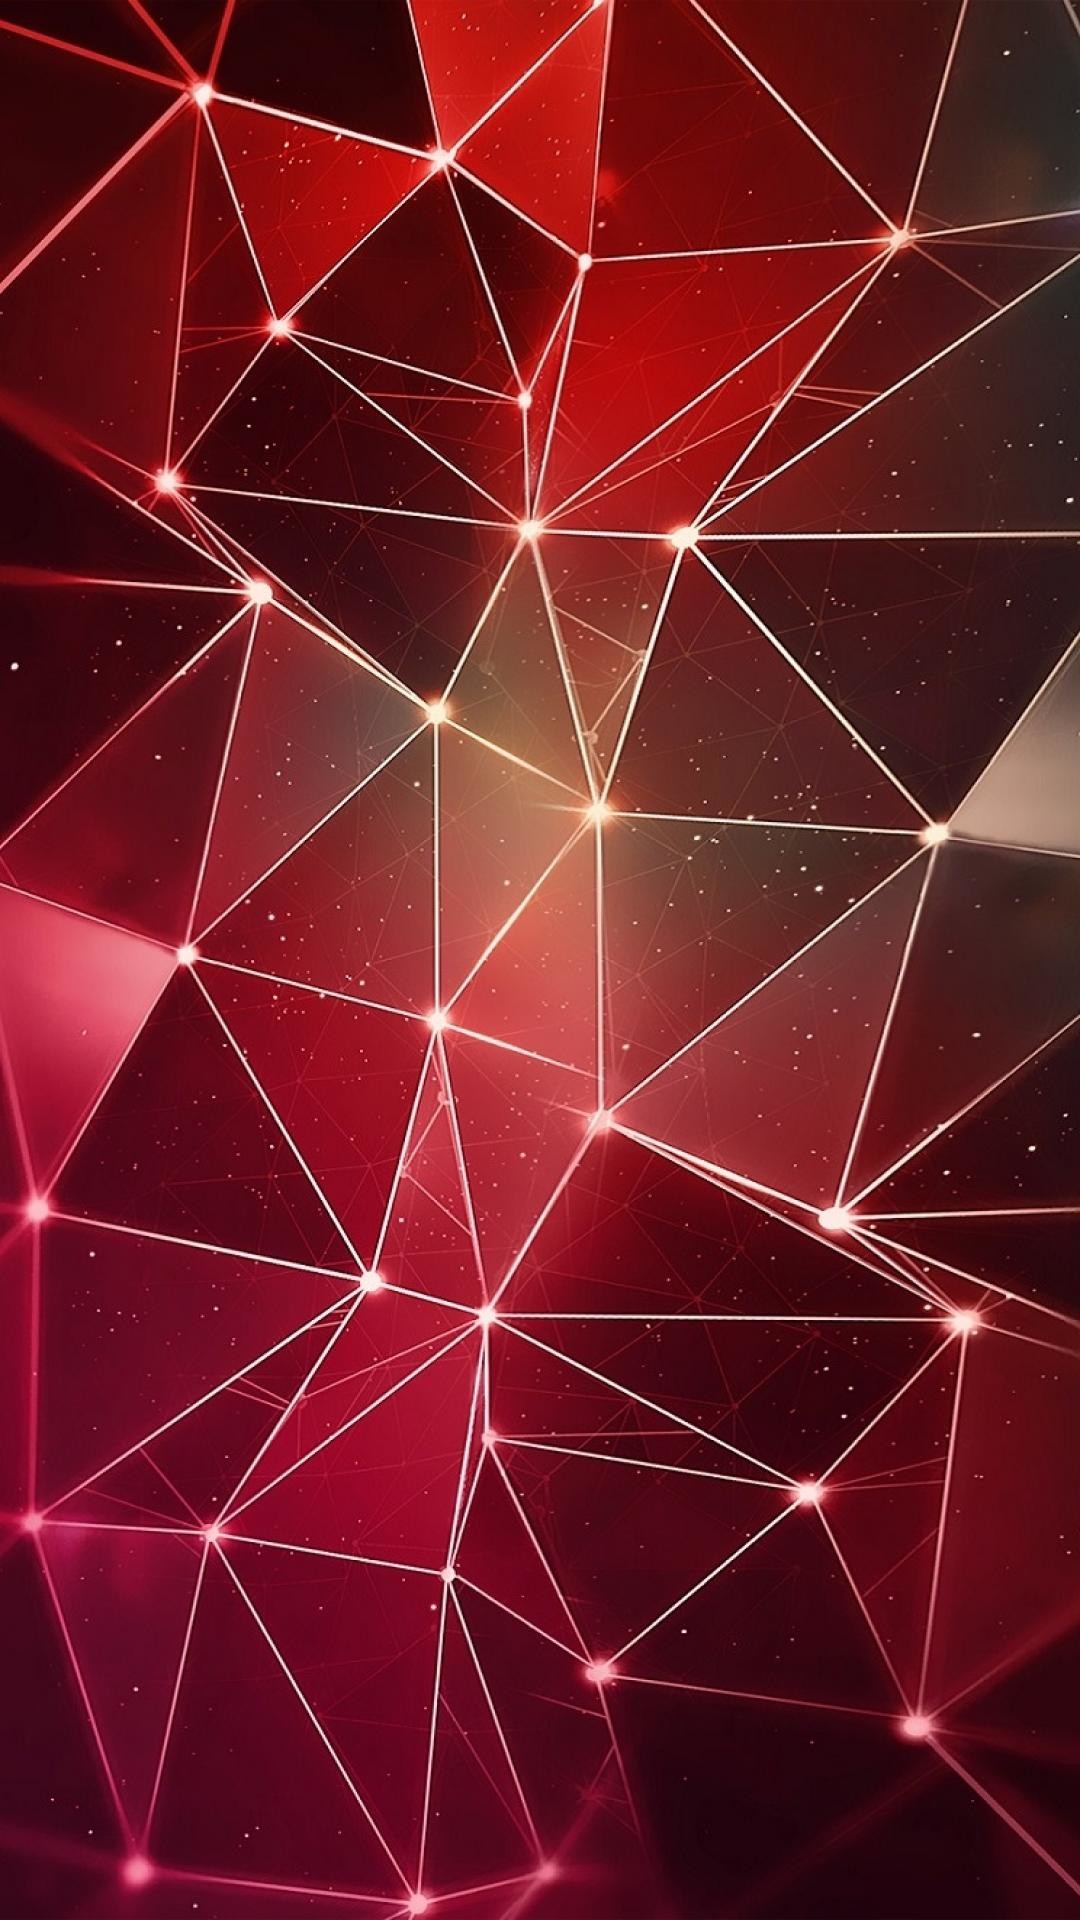 The Iphone Retina Wallpaper I Like In Red 1080x1920